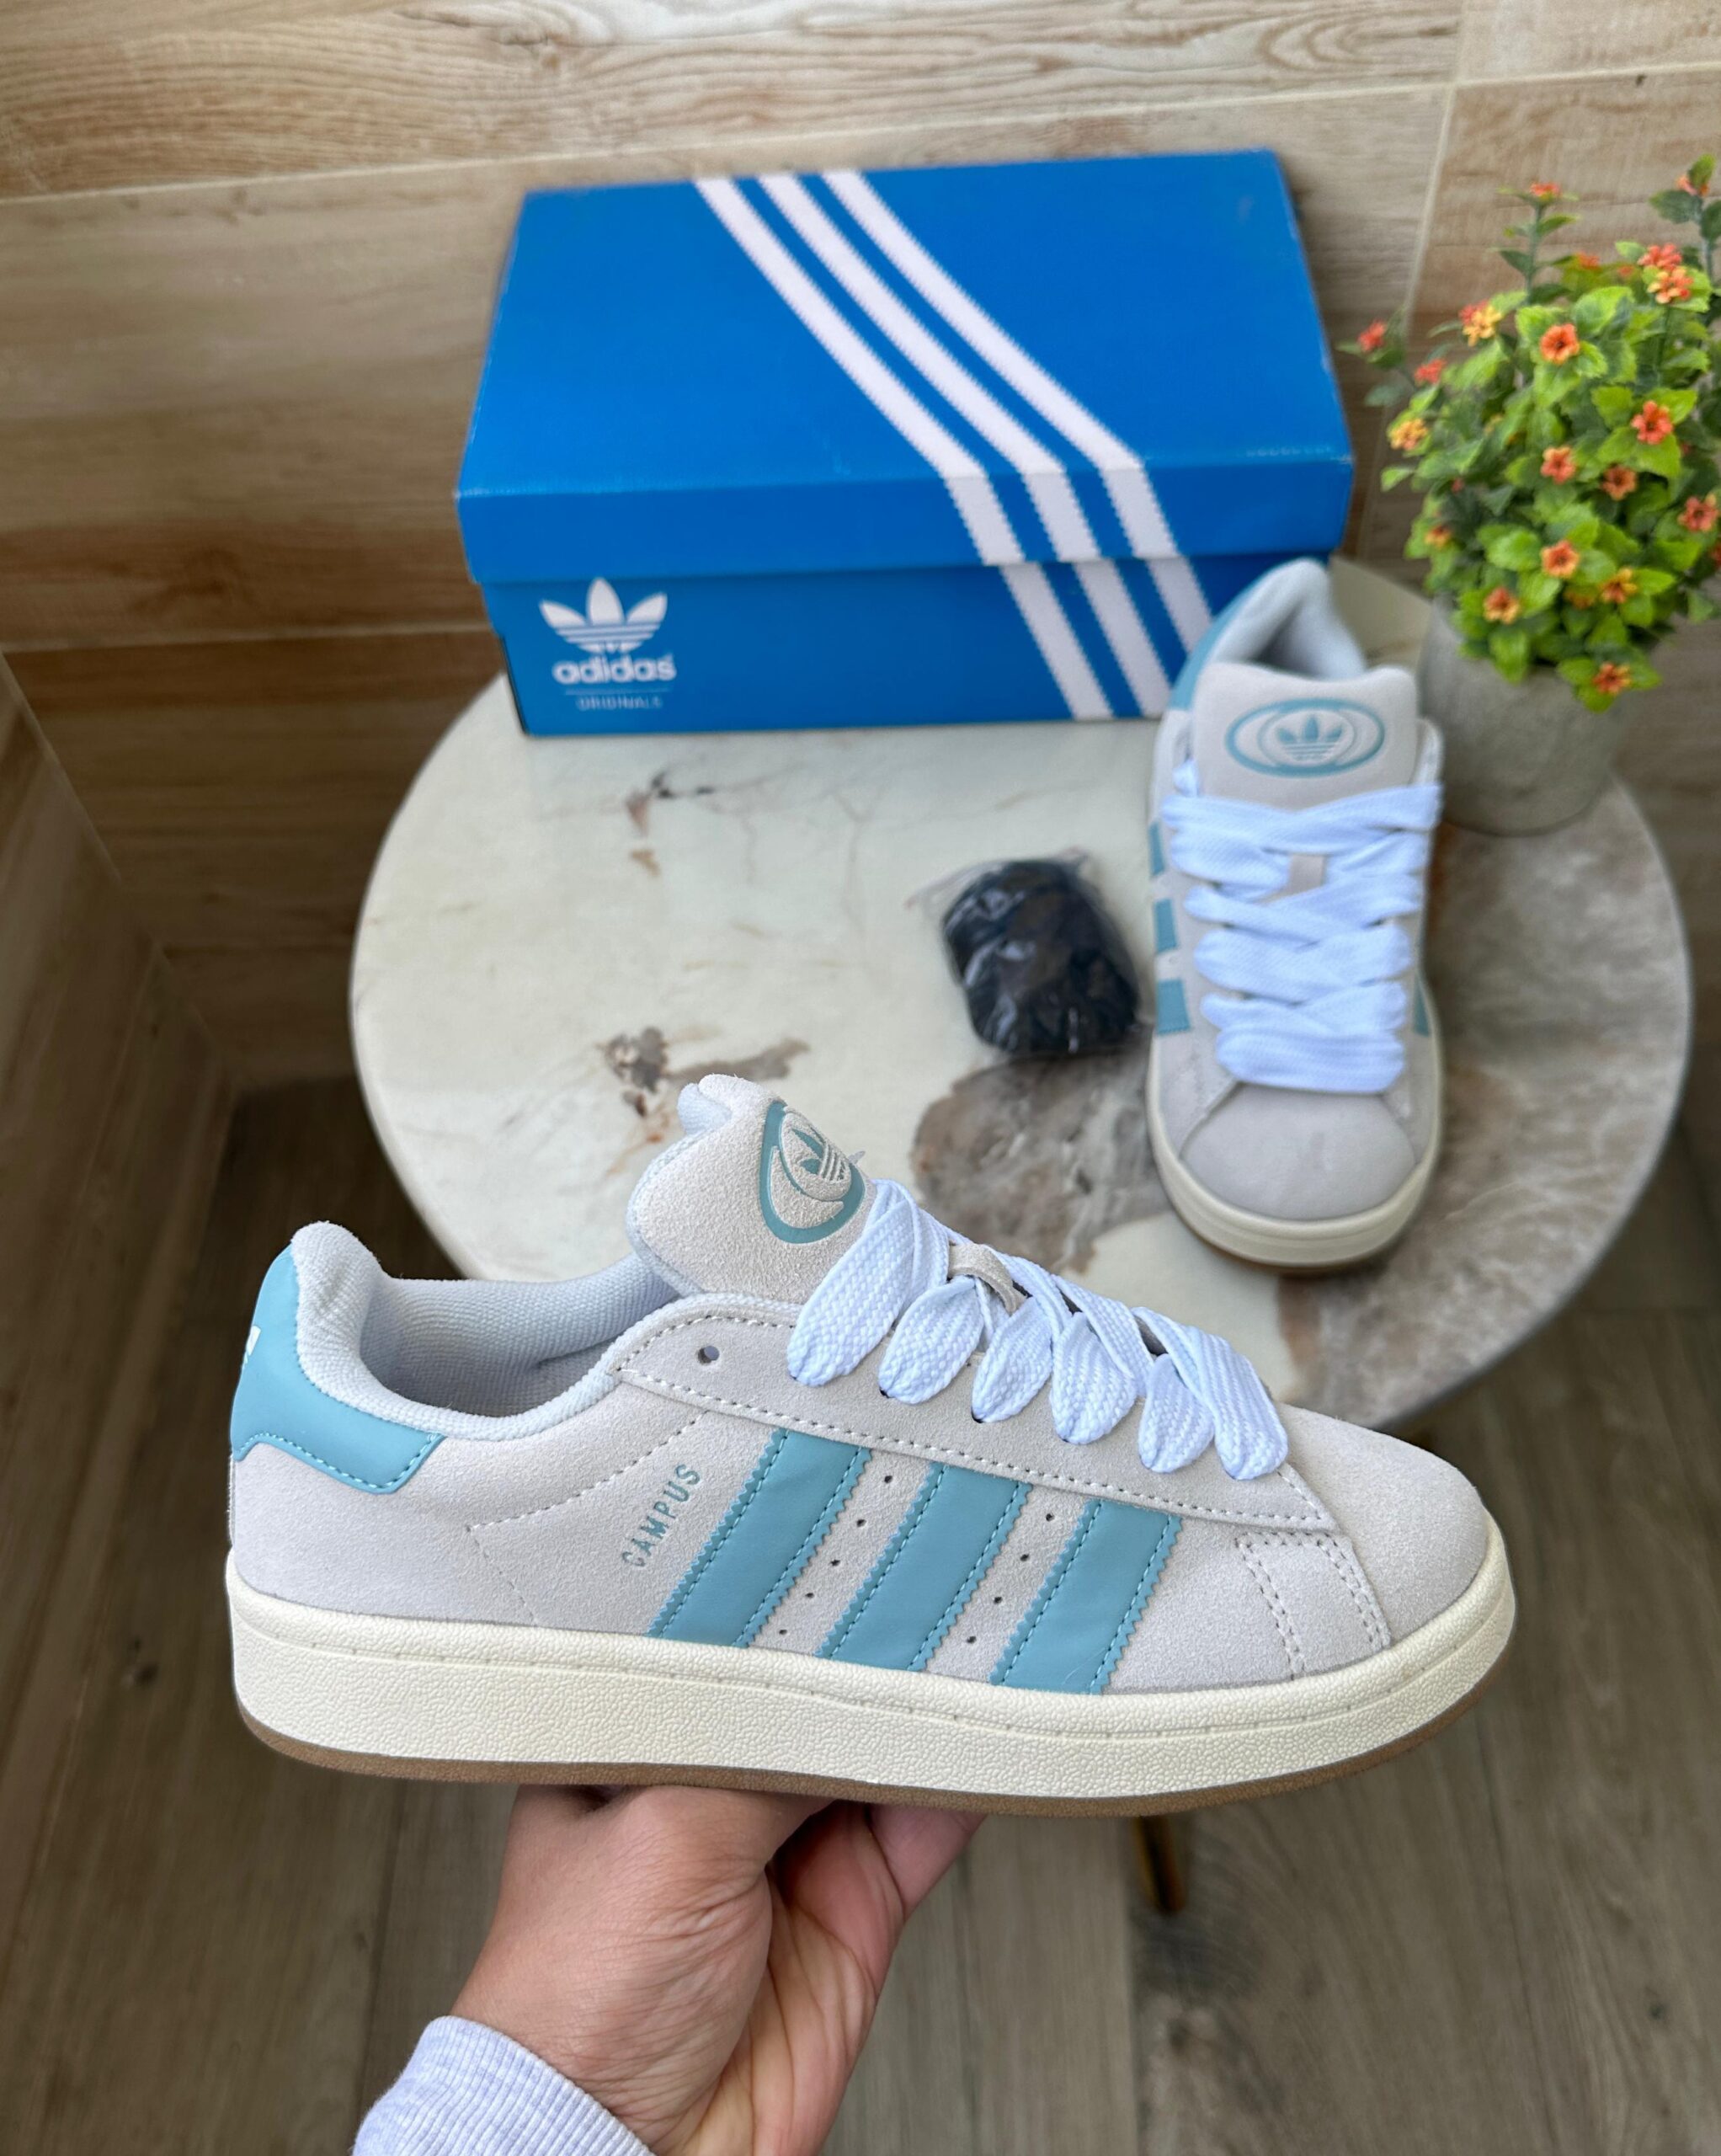 Campus White Preloved Blue Sneakers For Girls